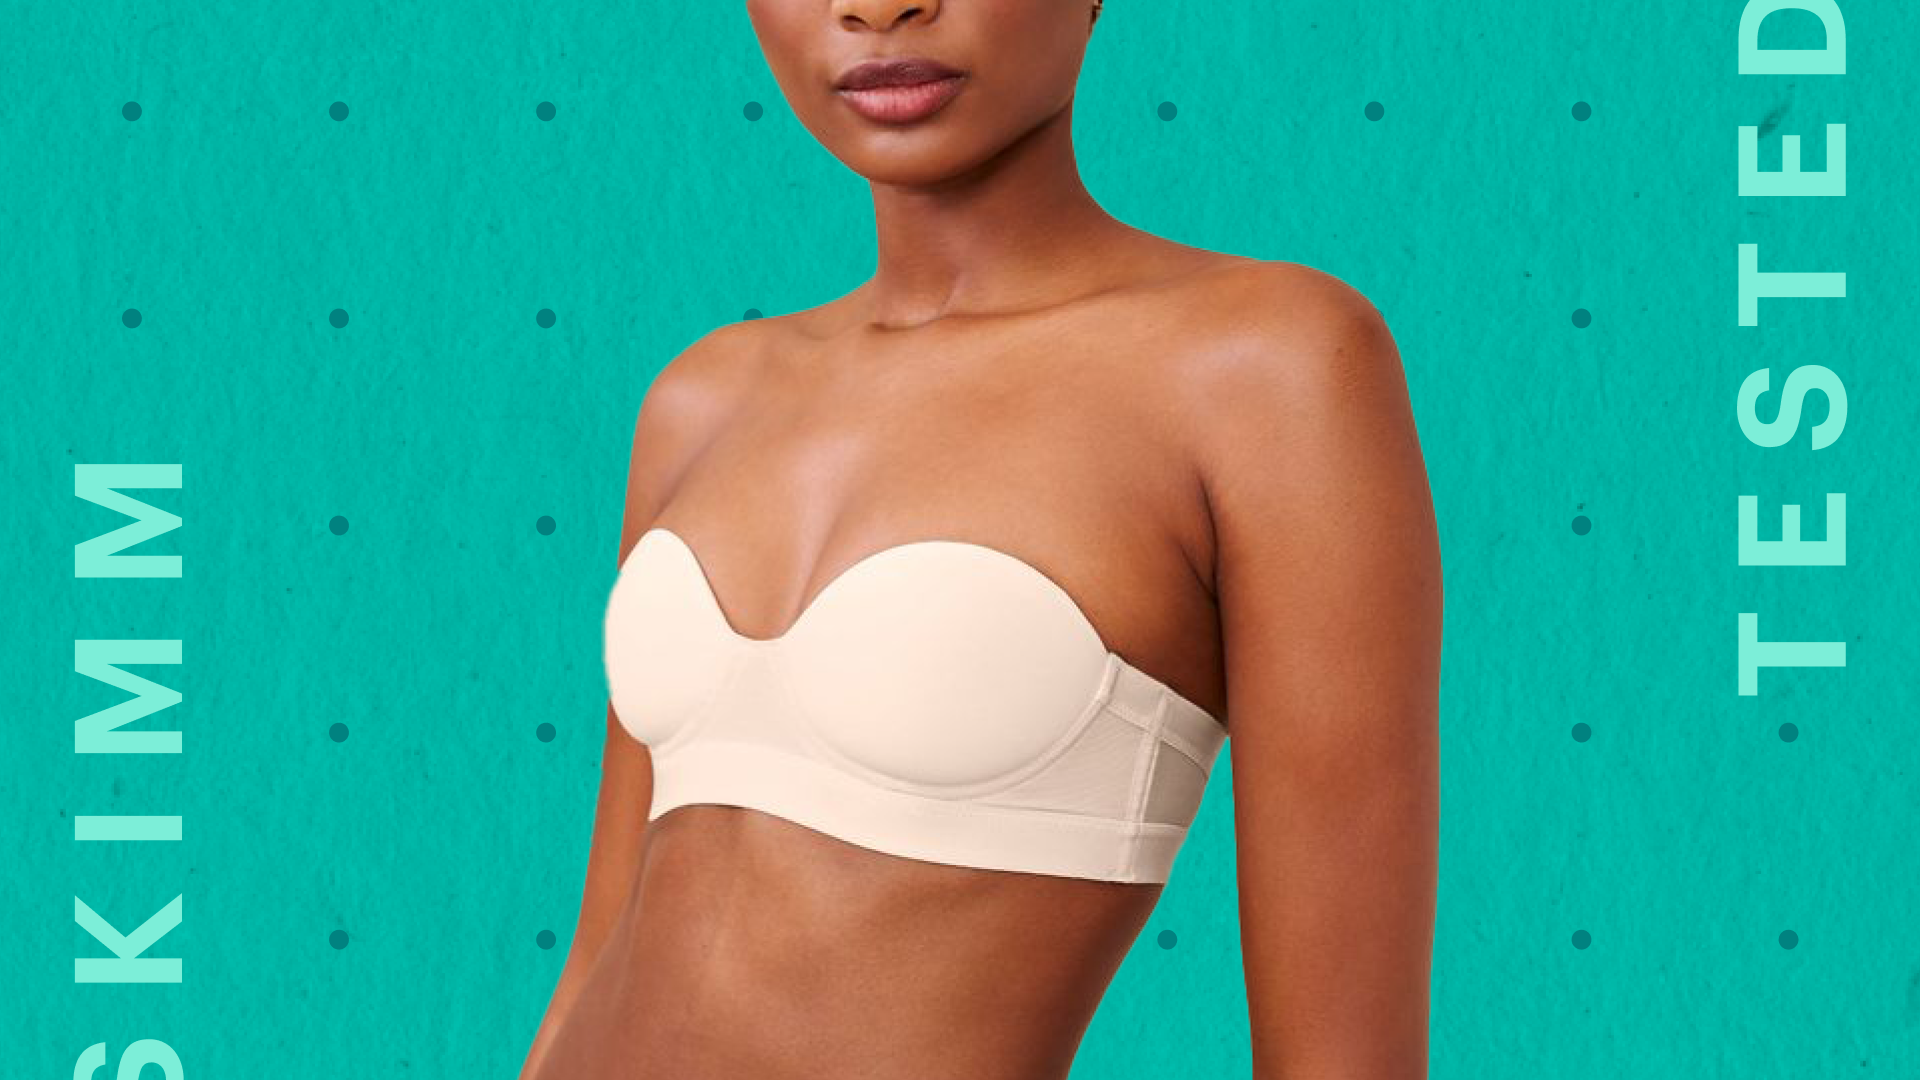 Pepper All You bra review - Reviewed